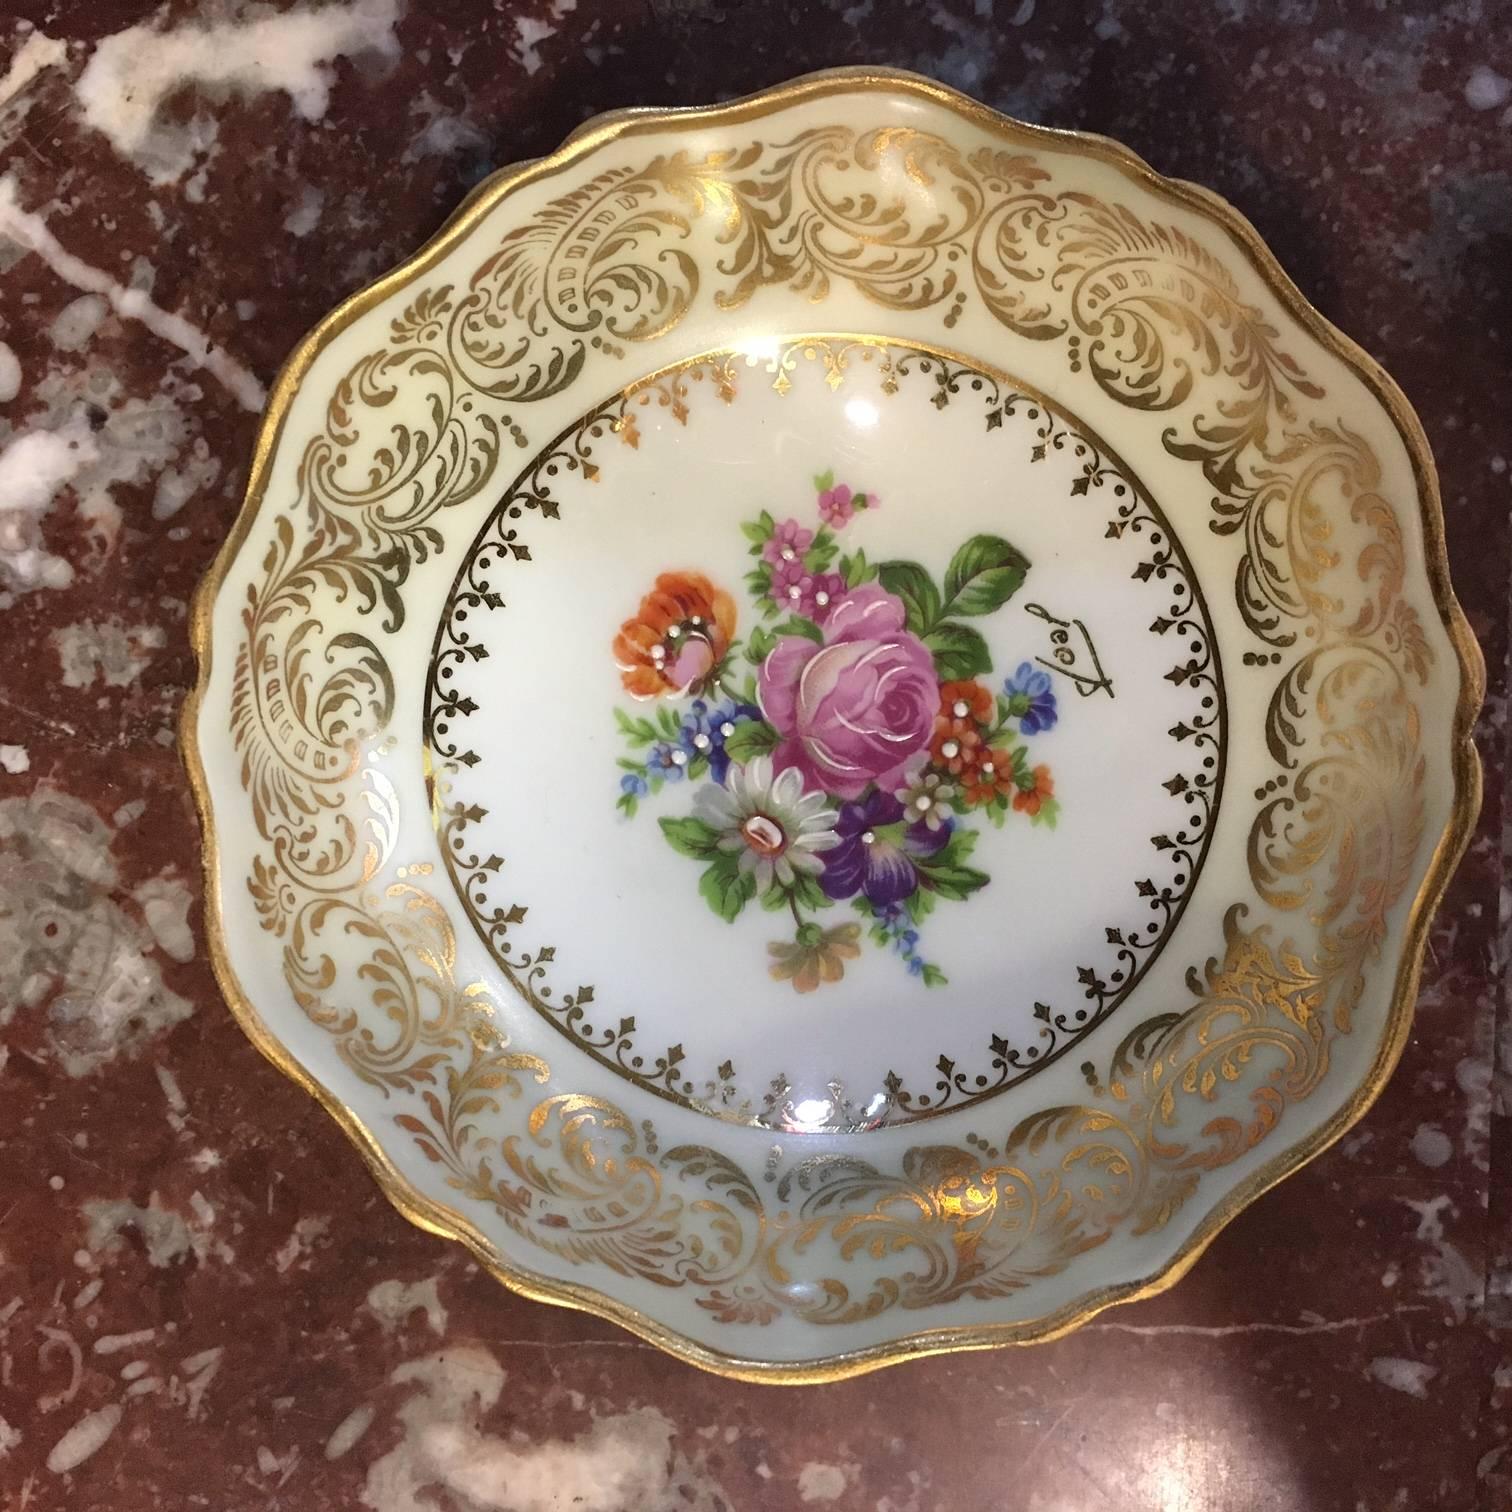 An unique and wonderful set of hand-painted desert bowls nine pieces. Double back stamped and factory decorated Jammet Seignolles Limoges Rehausse Main. Each variety hand-painted on the back of the bowl. These beautiful and rare set of nine bowls